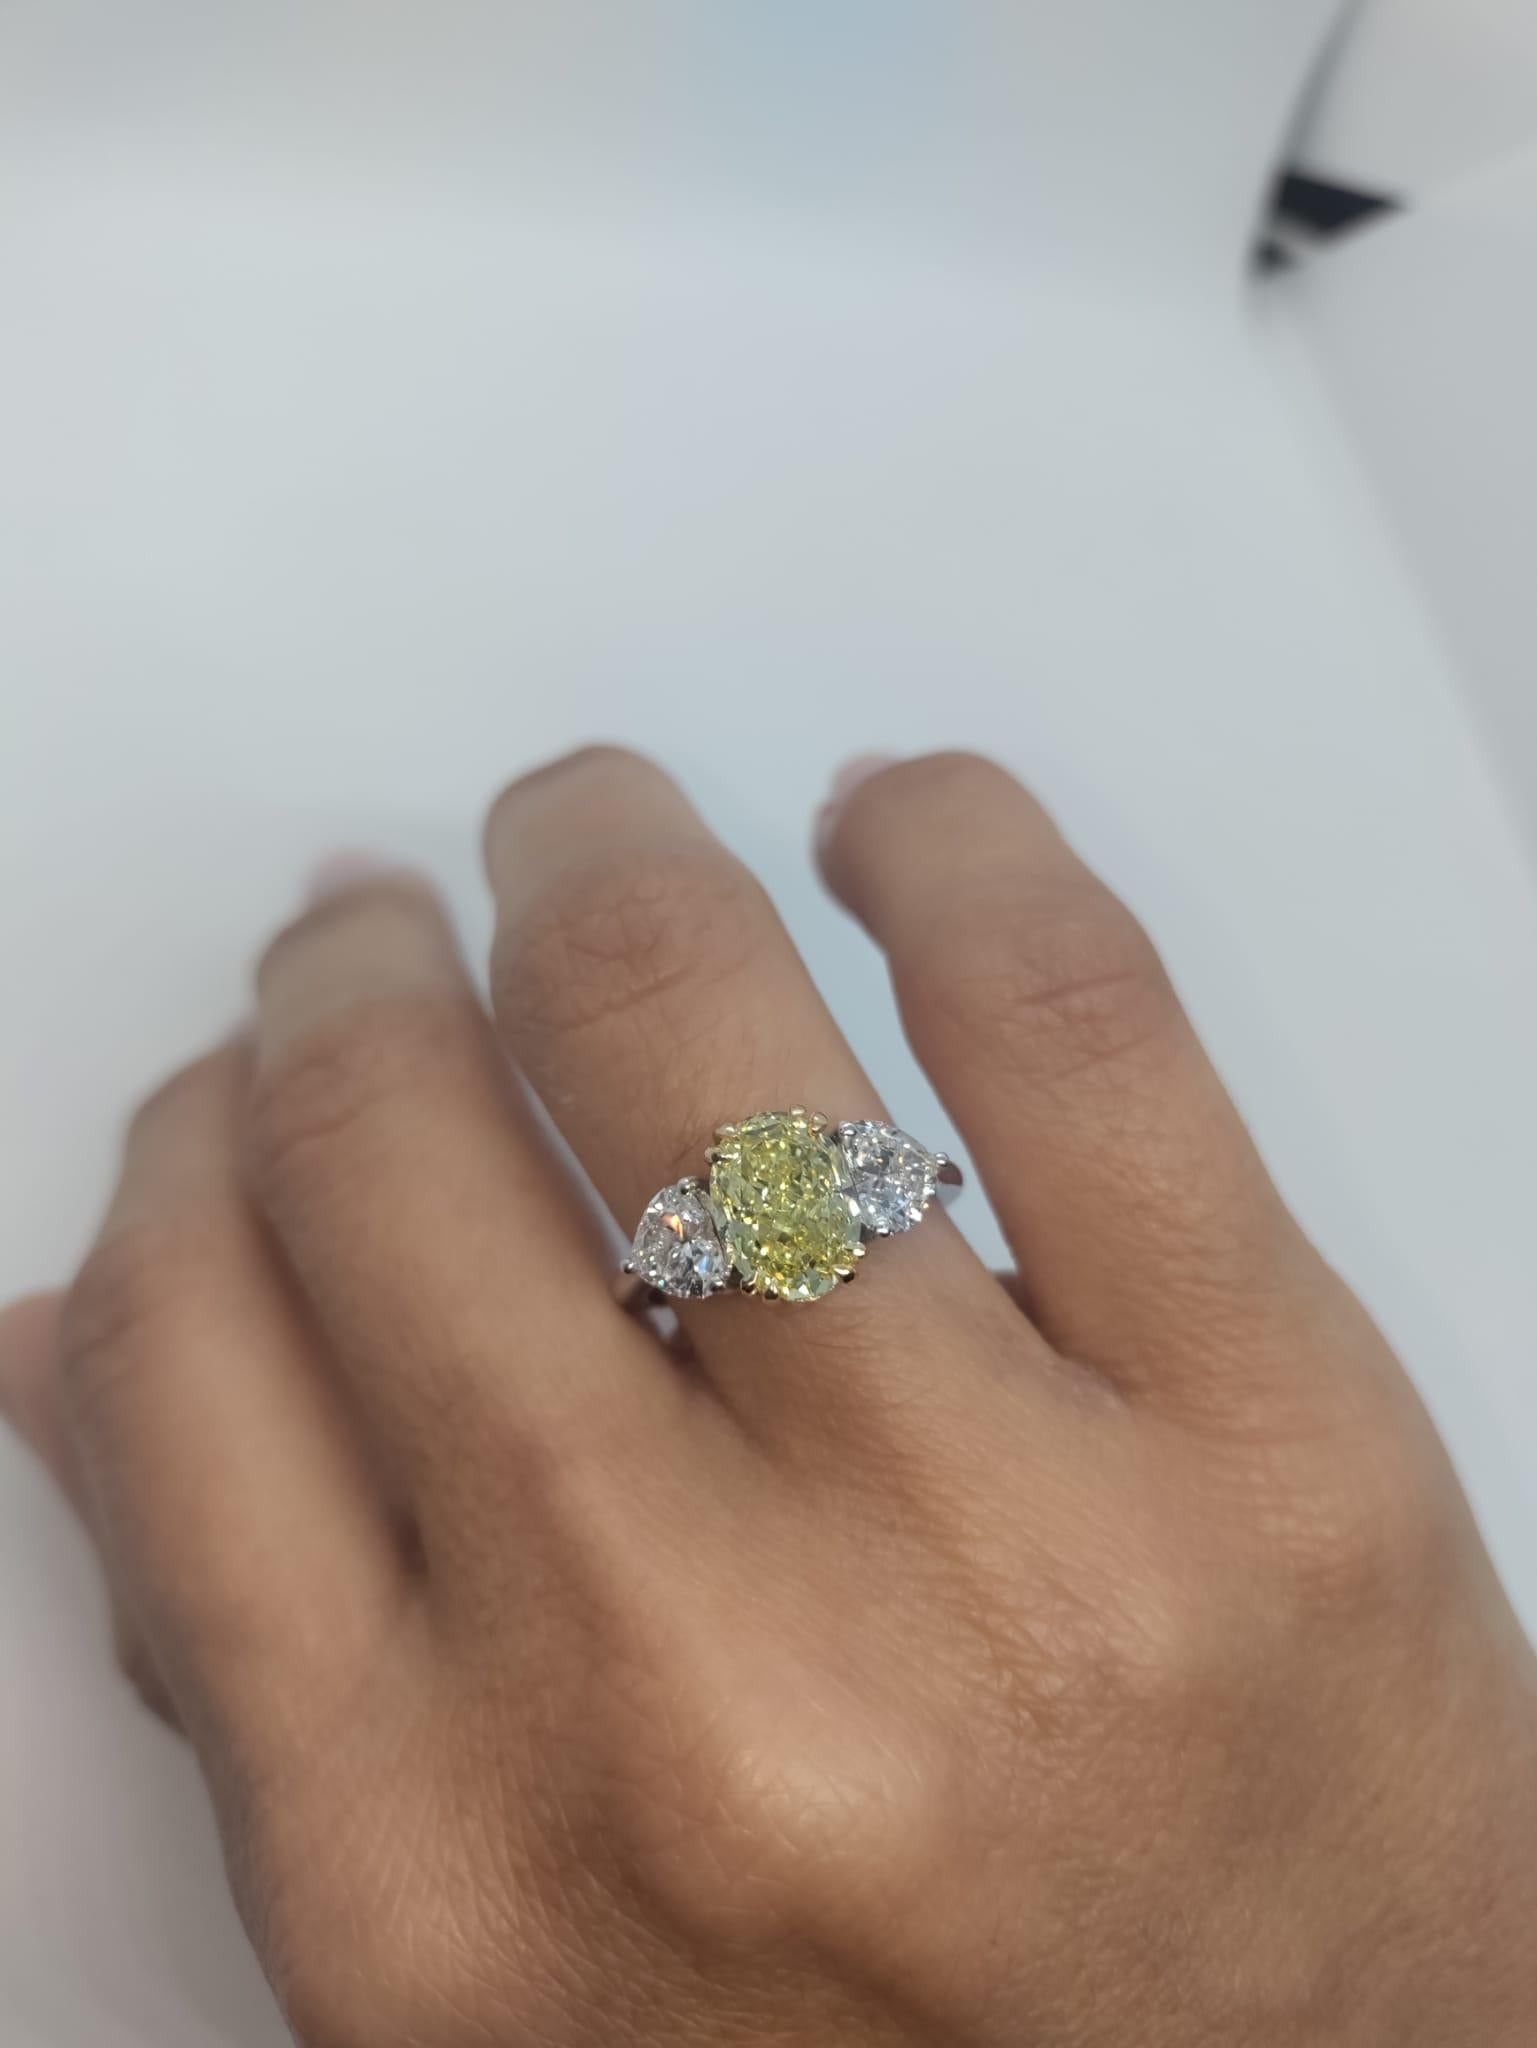 An exquisite Antinori Fine Jewels creation. A 3.05 carat fancy yellow oval diamond solitaire with an extremely bright and even fancy yellow color.

The side diamonds are internally flawless d color triple excellent none fluorescence investment grade